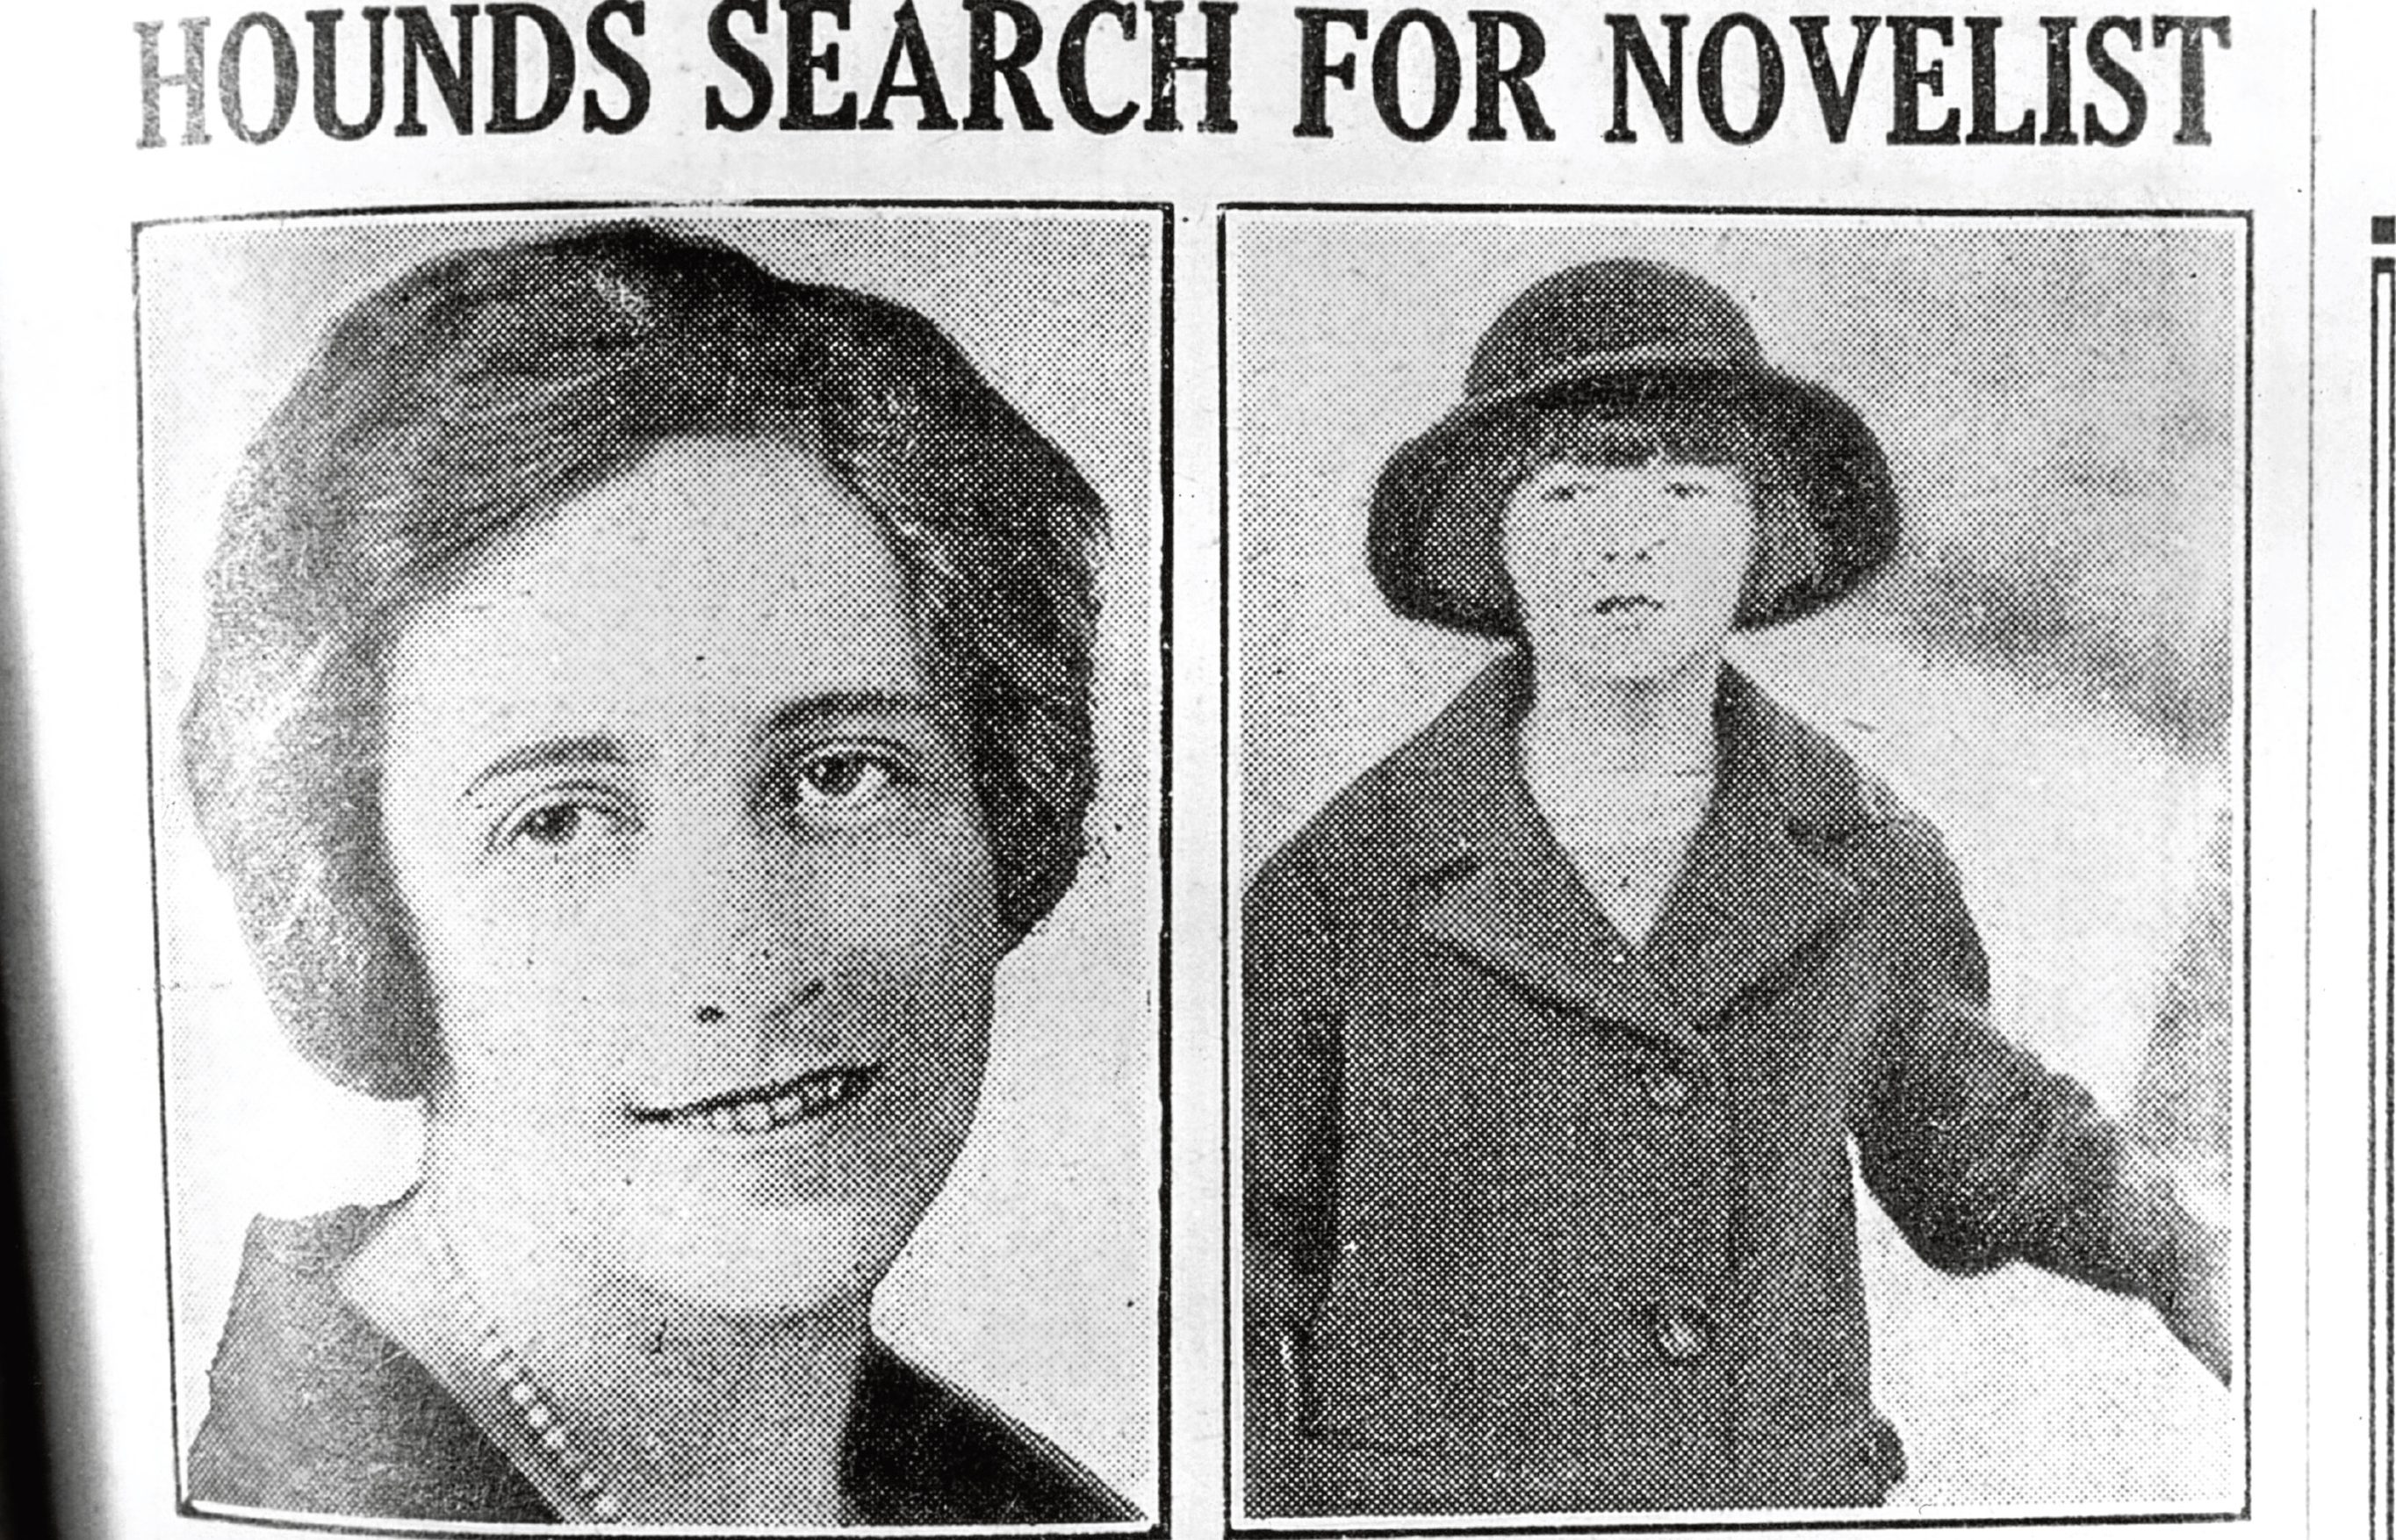 English crime writer Agatha Christie and her daughter, Rosalind, are featured in a newspaper article reporting the mysterious disappearance of the novelist.  (Hulton Archive/Getty Images)